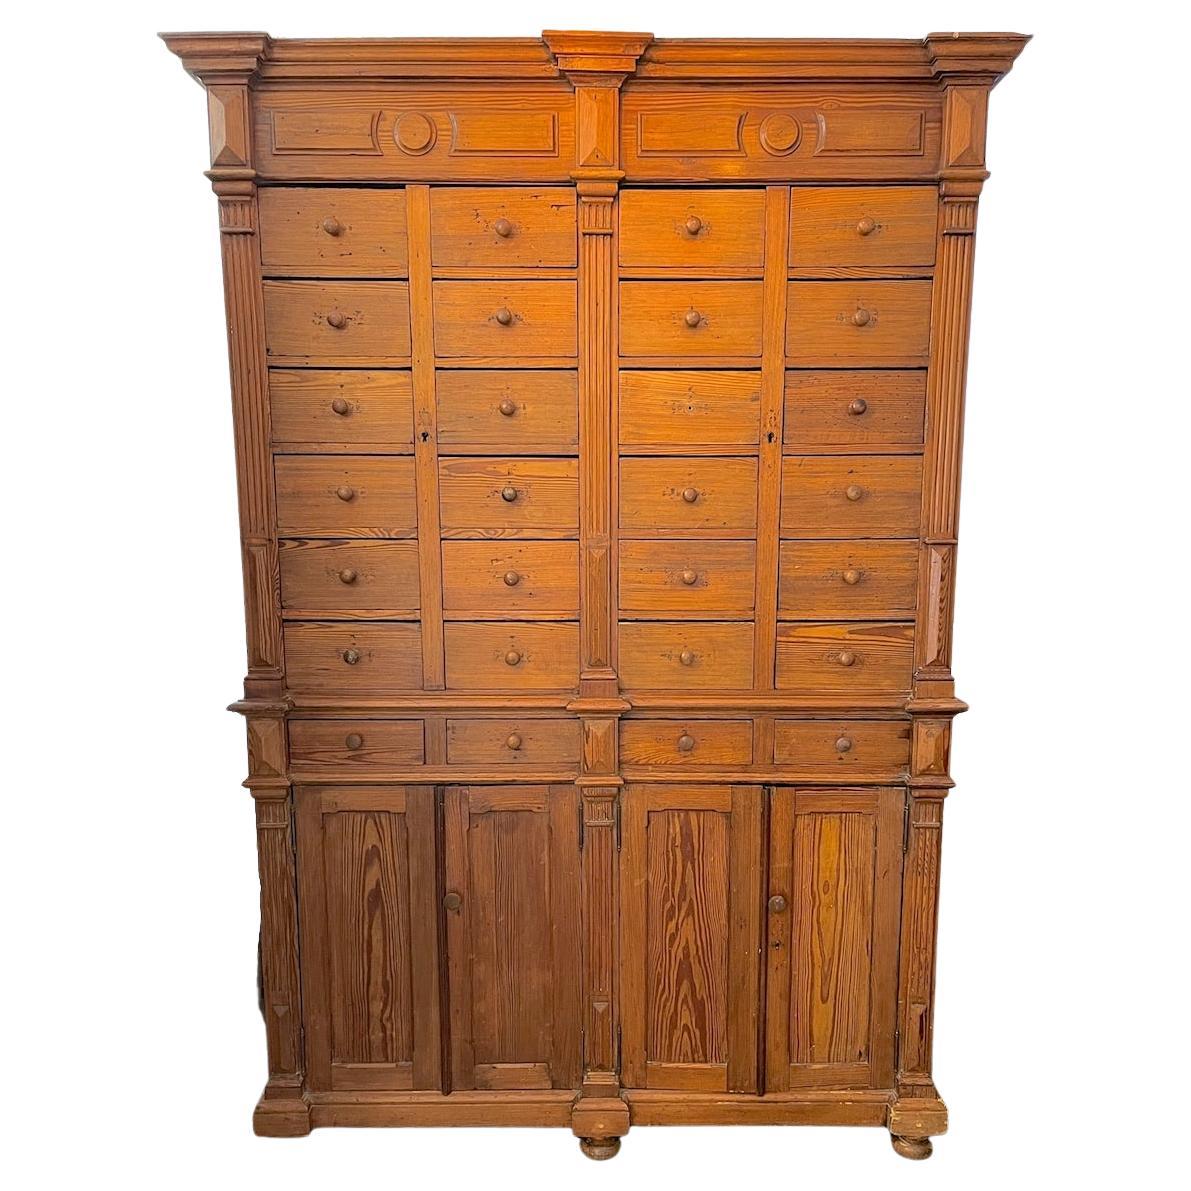 French 19th Century 28 Drawer Oak Apothecary Cabinet with 2 Lower Door Cabinets For Sale